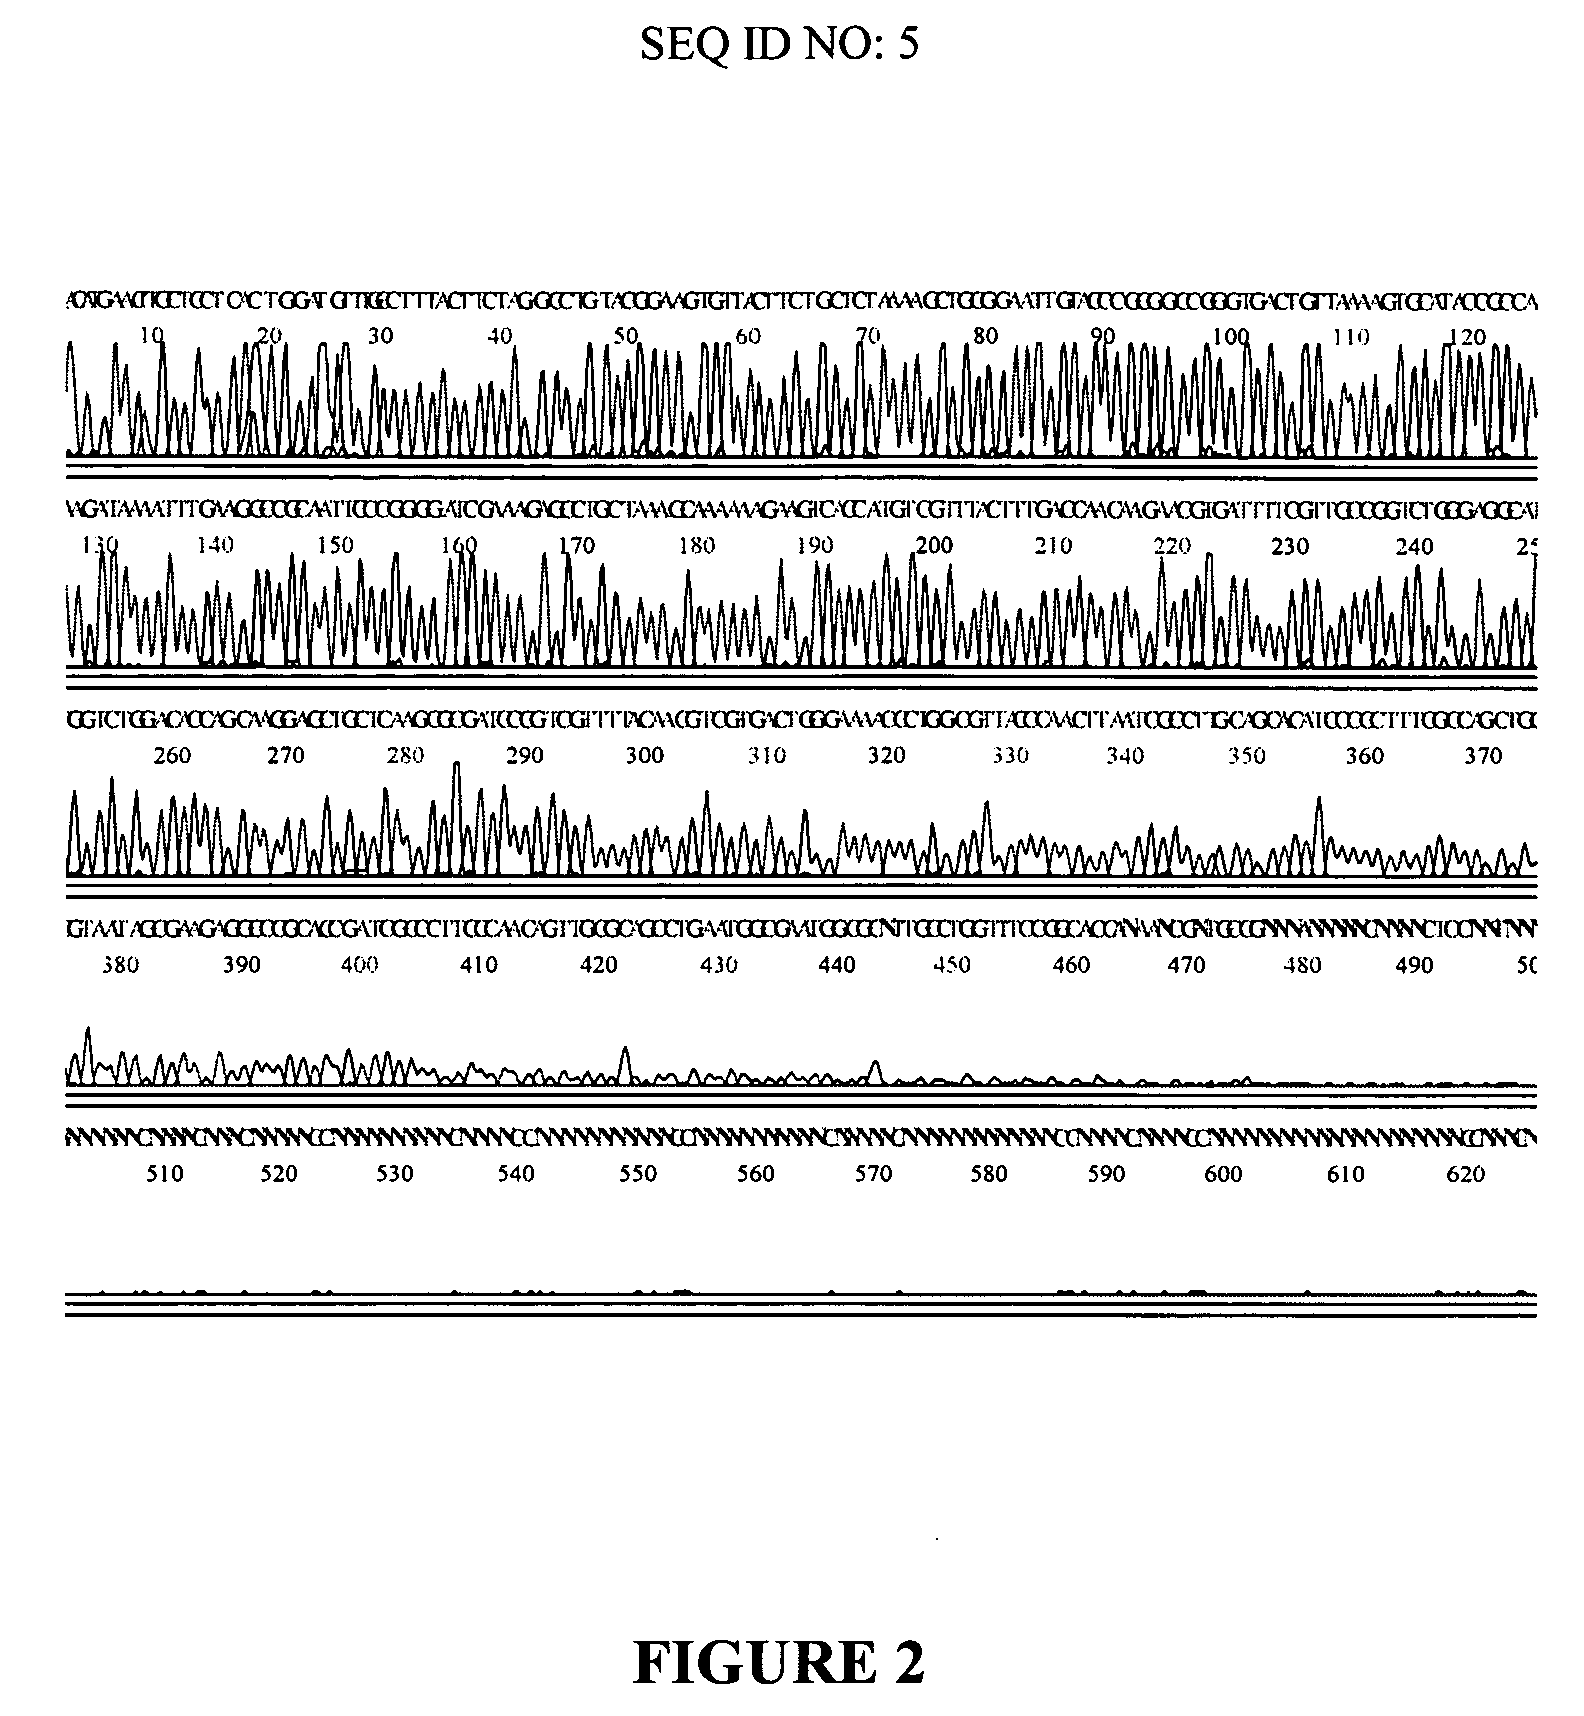 Multiply-primed amplification of nucleic acid sequences